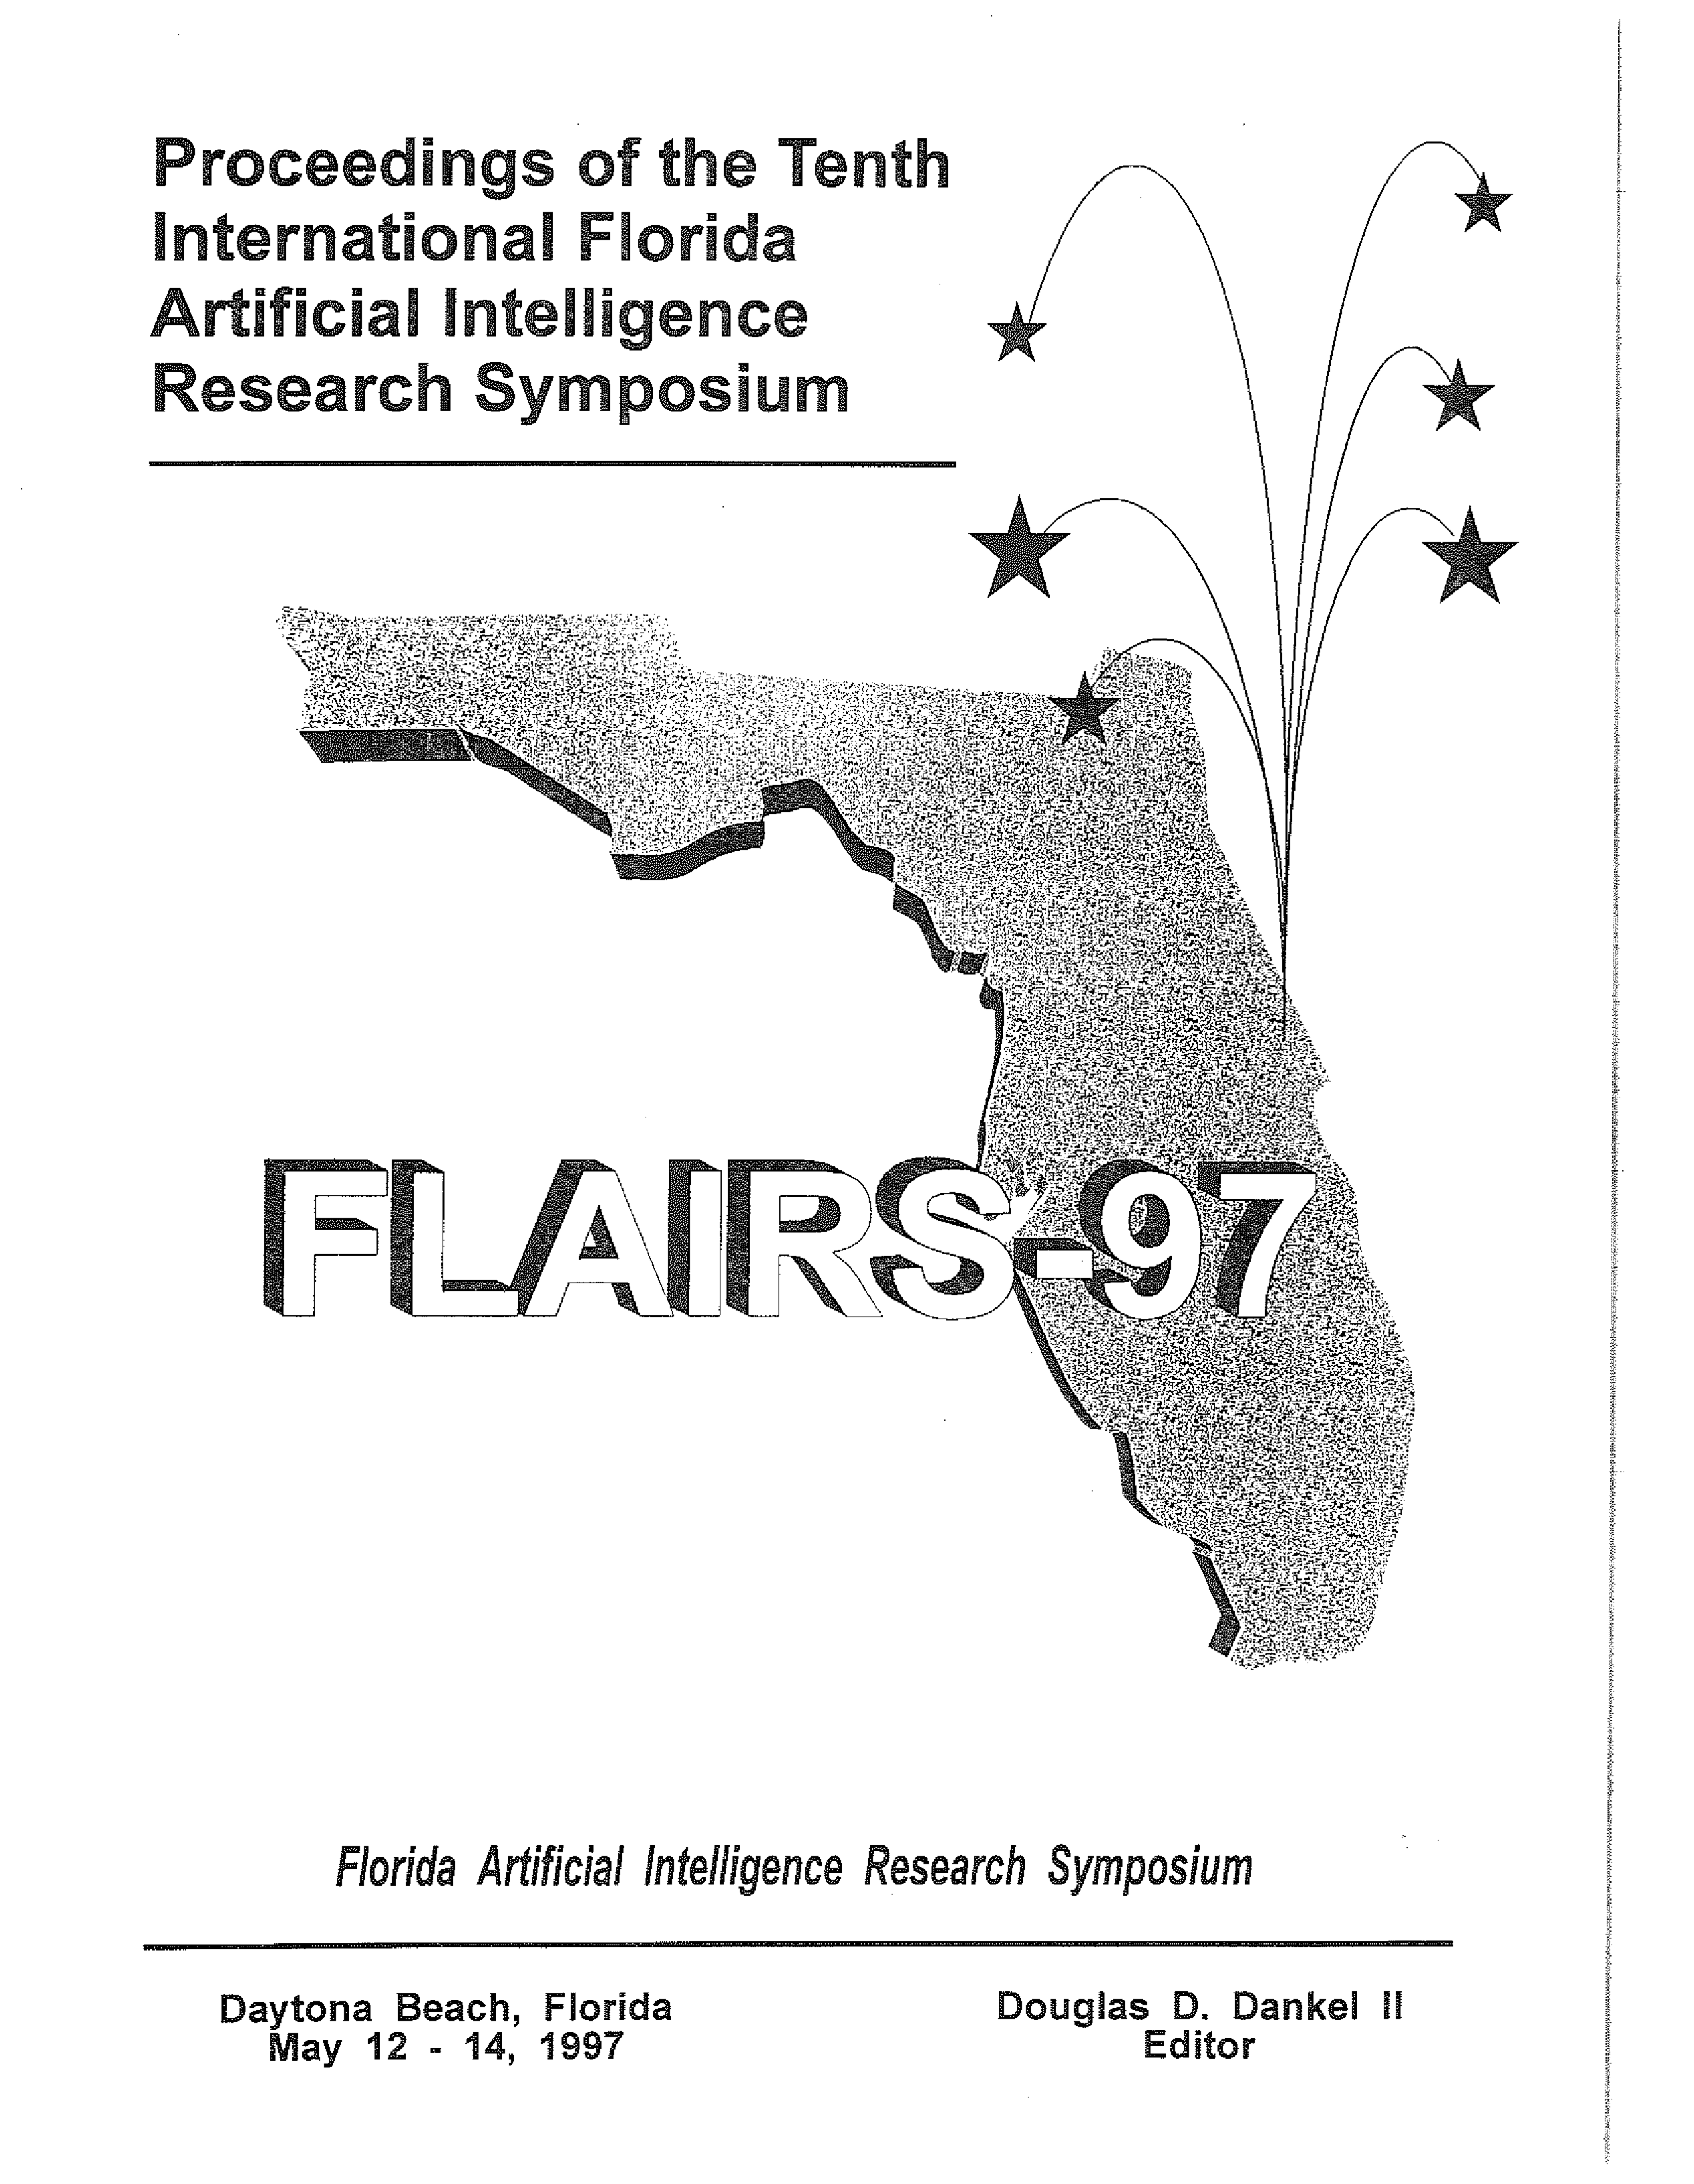 Proceedings of FLAIRS-10, cover